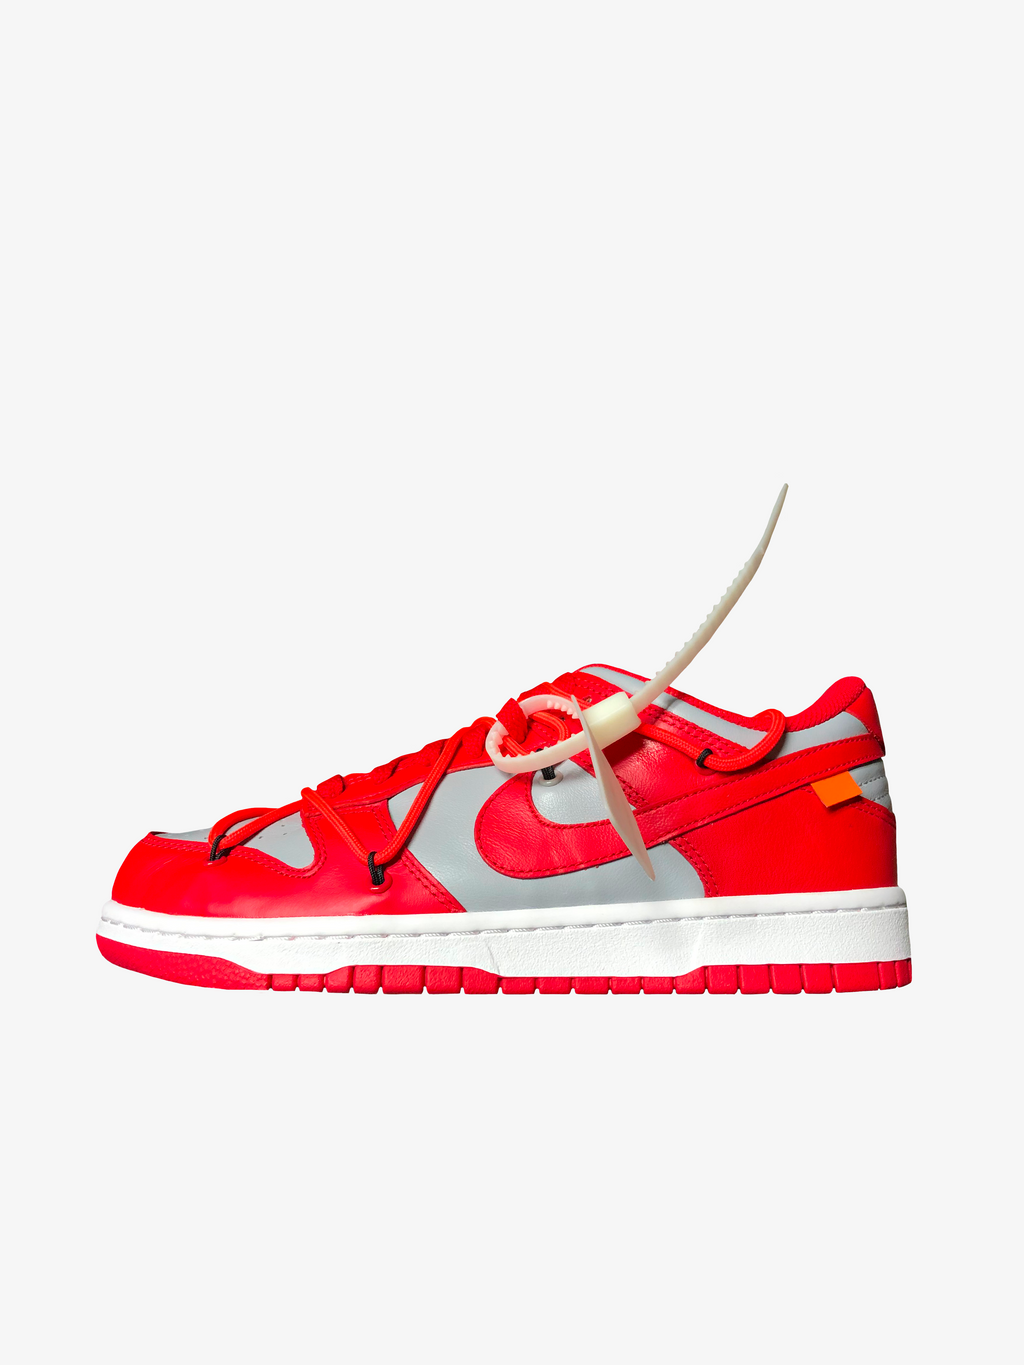 Nike Dunk Low x OFF-WHITE CT0856-600 New Box 9.5 University Red gray grey  225419